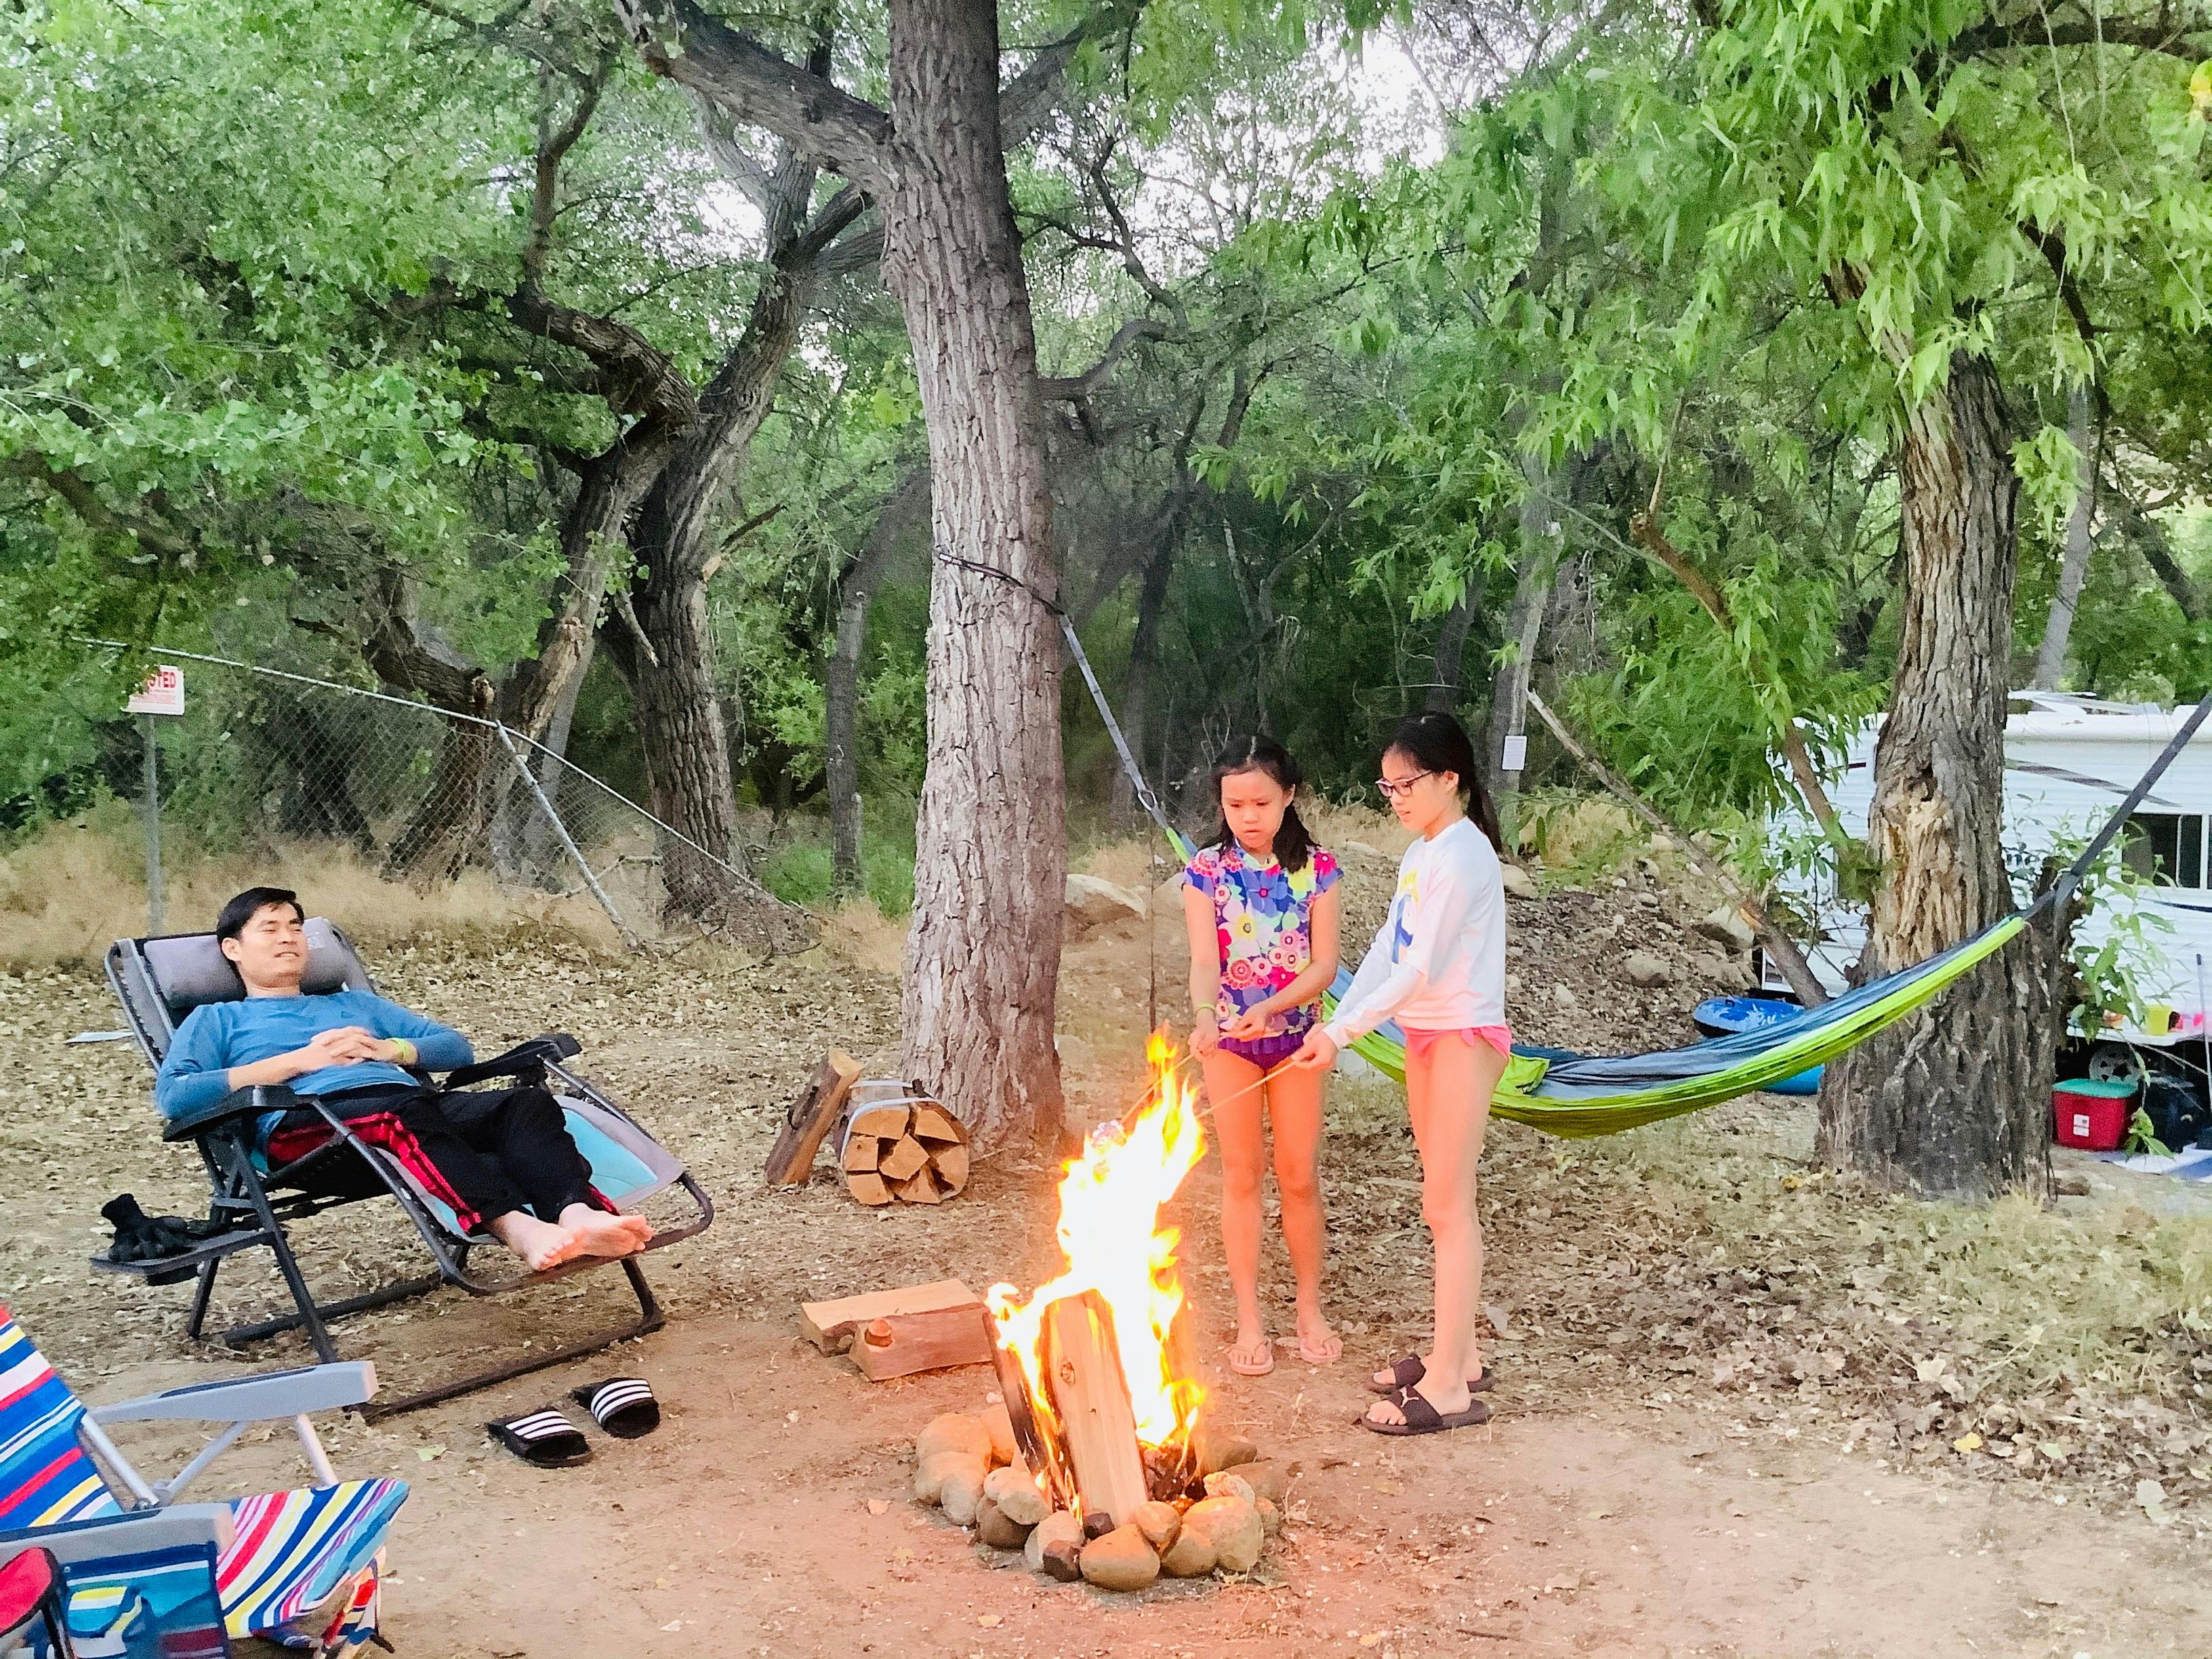 Brenda and Tiger's daughters roasting marshmallows by a campfire